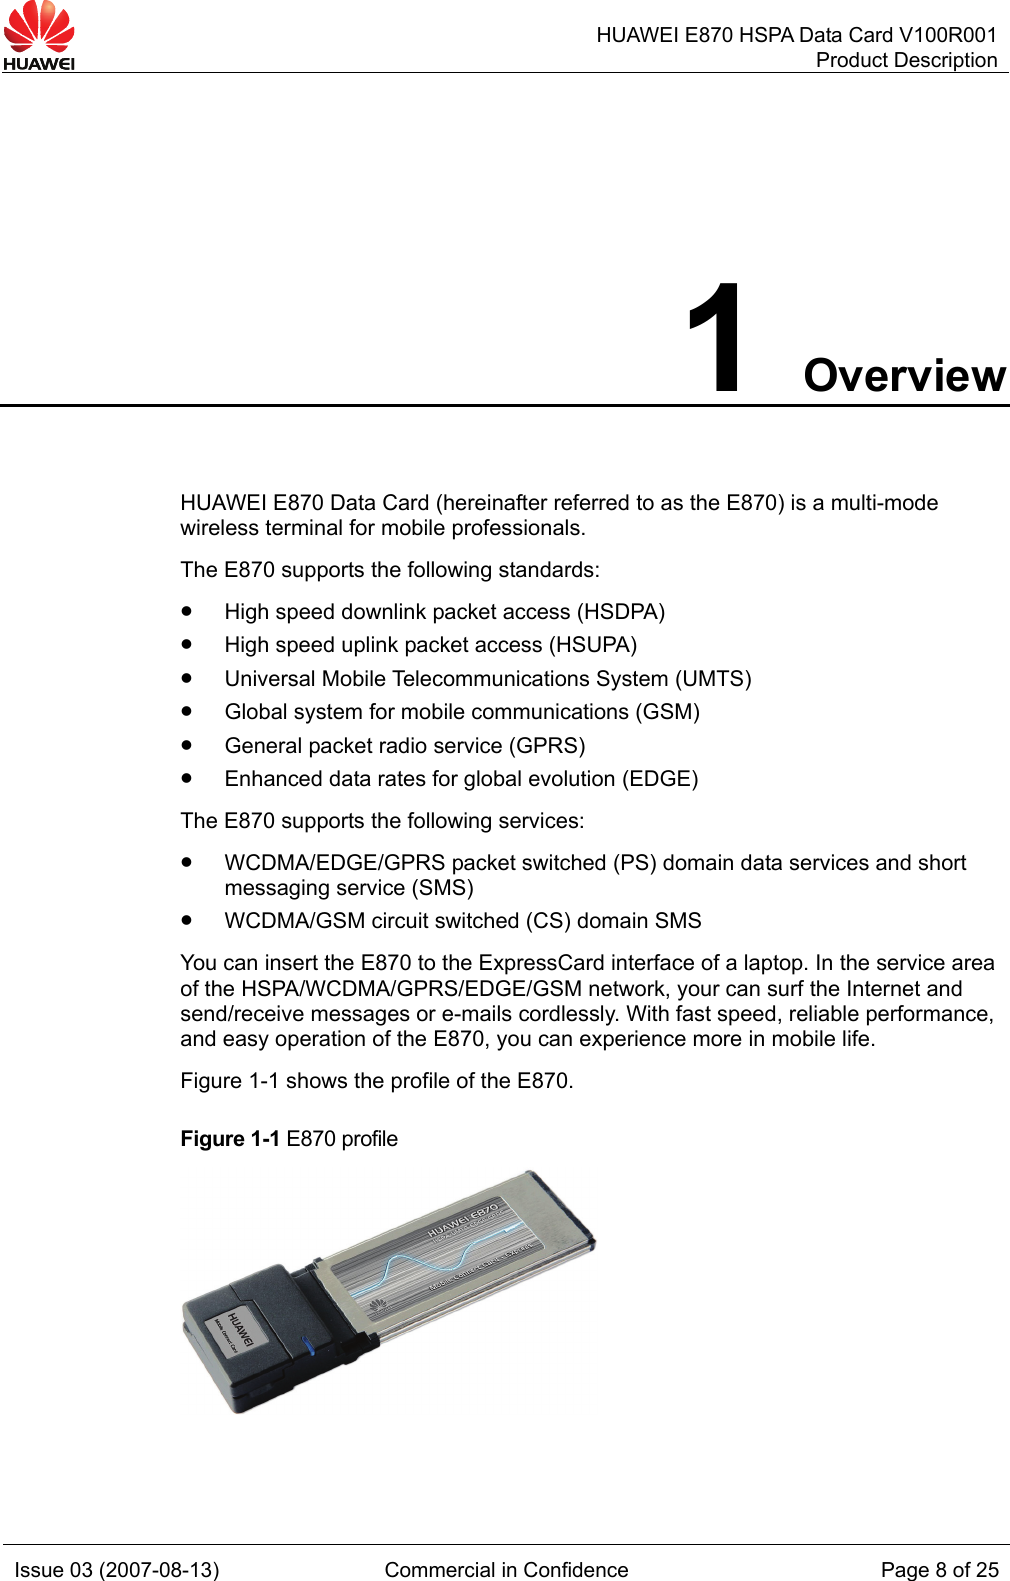   HUAWEI E870 HSPA Data Card V100R001Product Description Issue 03 (2007-08-13)  Commercial in Confidence  Page 8 of 25 1 Overview HUAWEI E870 Data Card (hereinafter referred to as the E870) is a multi-mode wireless terminal for mobile professionals. The E870 supports the following standards: z High speed downlink packet access (HSDPA) z High speed uplink packet access (HSUPA) z Universal Mobile Telecommunications System (UMTS) z Global system for mobile communications (GSM) z General packet radio service (GPRS) z Enhanced data rates for global evolution (EDGE) The E870 supports the following services: z WCDMA/EDGE/GPRS packet switched (PS) domain data services and short messaging service (SMS) z WCDMA/GSM circuit switched (CS) domain SMS You can insert the E870 to the ExpressCard interface of a laptop. In the service area of the HSPA/WCDMA/GPRS/EDGE/GSM network, your can surf the Internet and send/receive messages or e-mails cordlessly. With fast speed, reliable performance, and easy operation of the E870, you can experience more in mobile life. Figure 1-1 shows the profile of the E870. Figure 1-1 E870 profile  